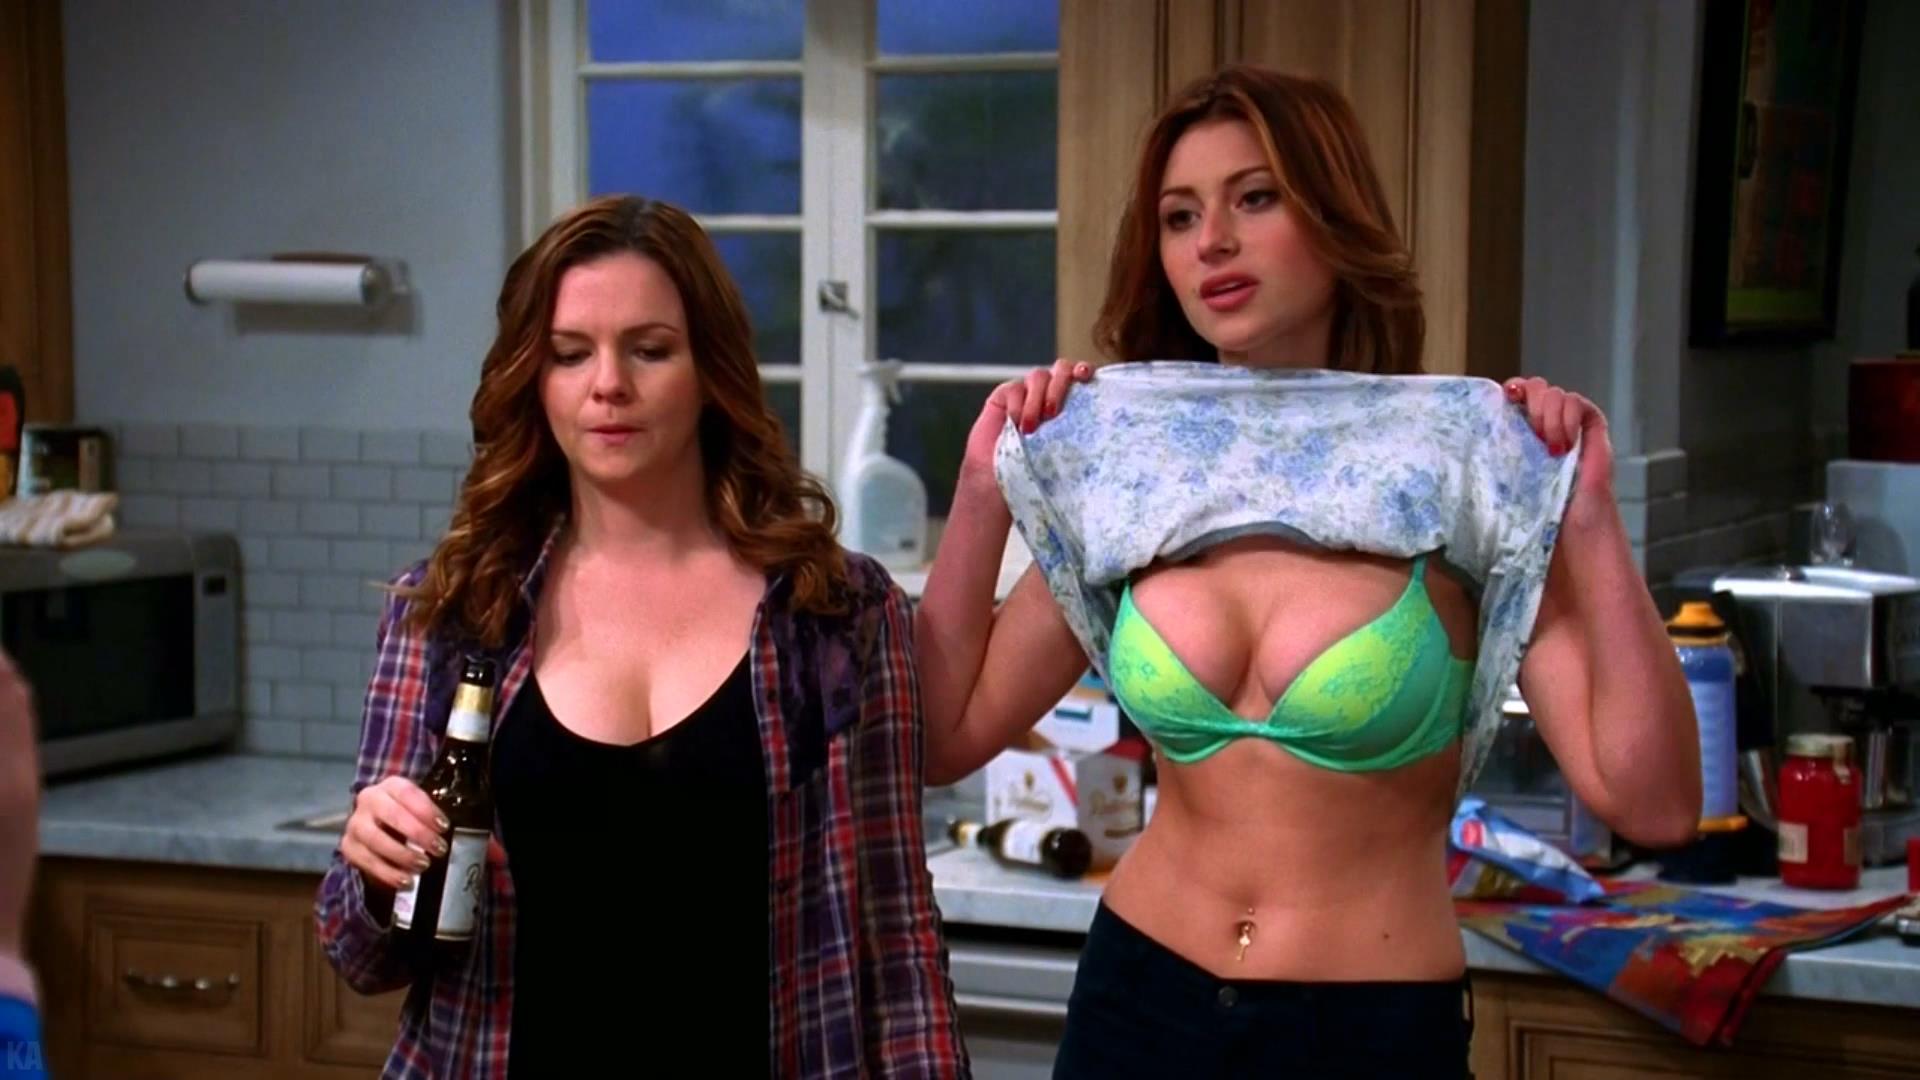 Chelsea from two and a half men naked